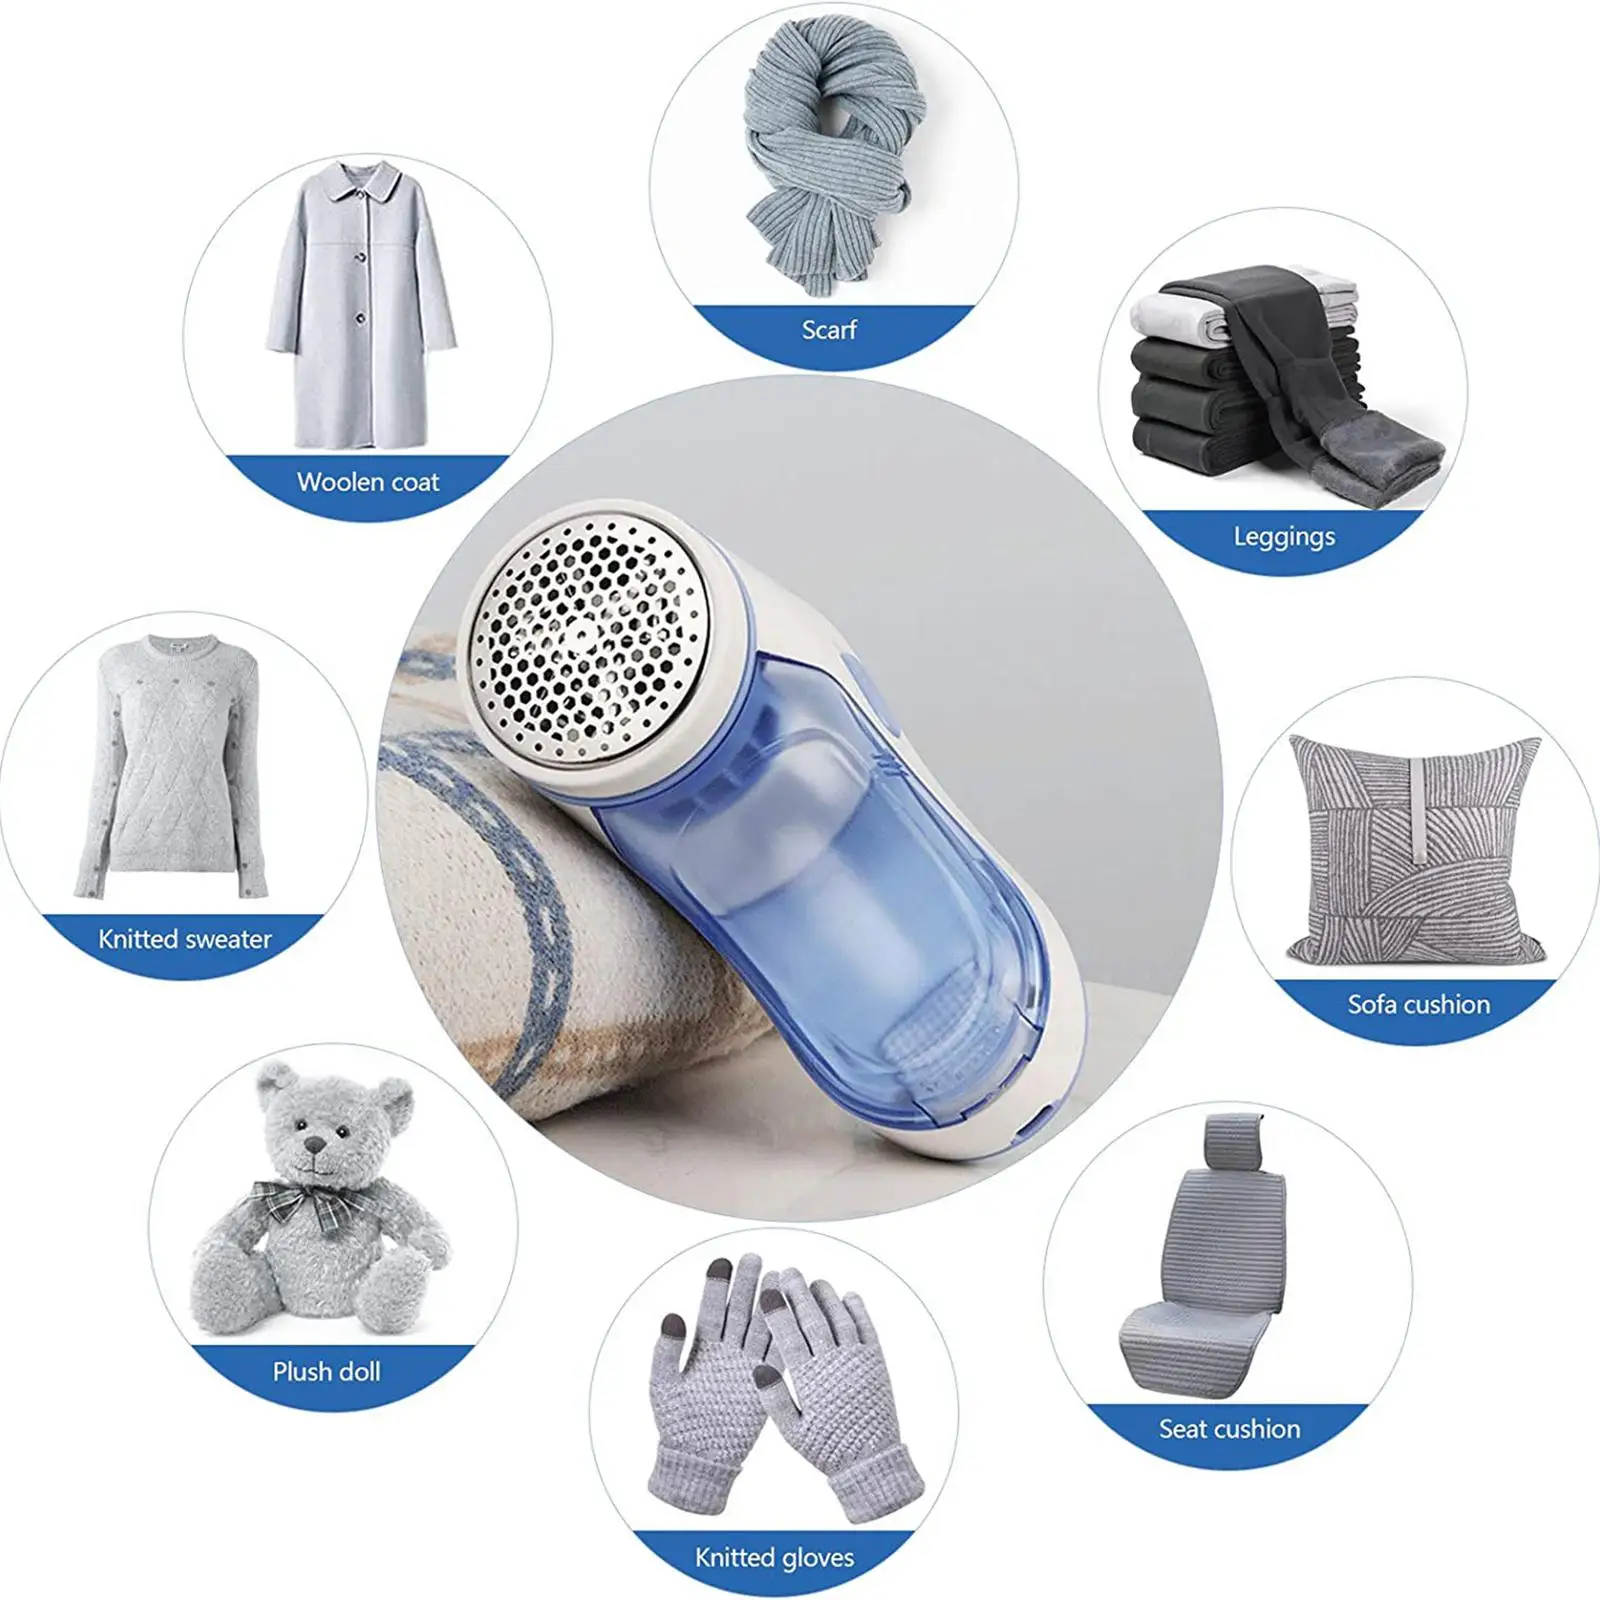 Electric Lint Remover Fabric Shaver Honeycomb Knives Net Removal USB Trimmer Defuzzer for Cashmere Blanket Clothing Cotton